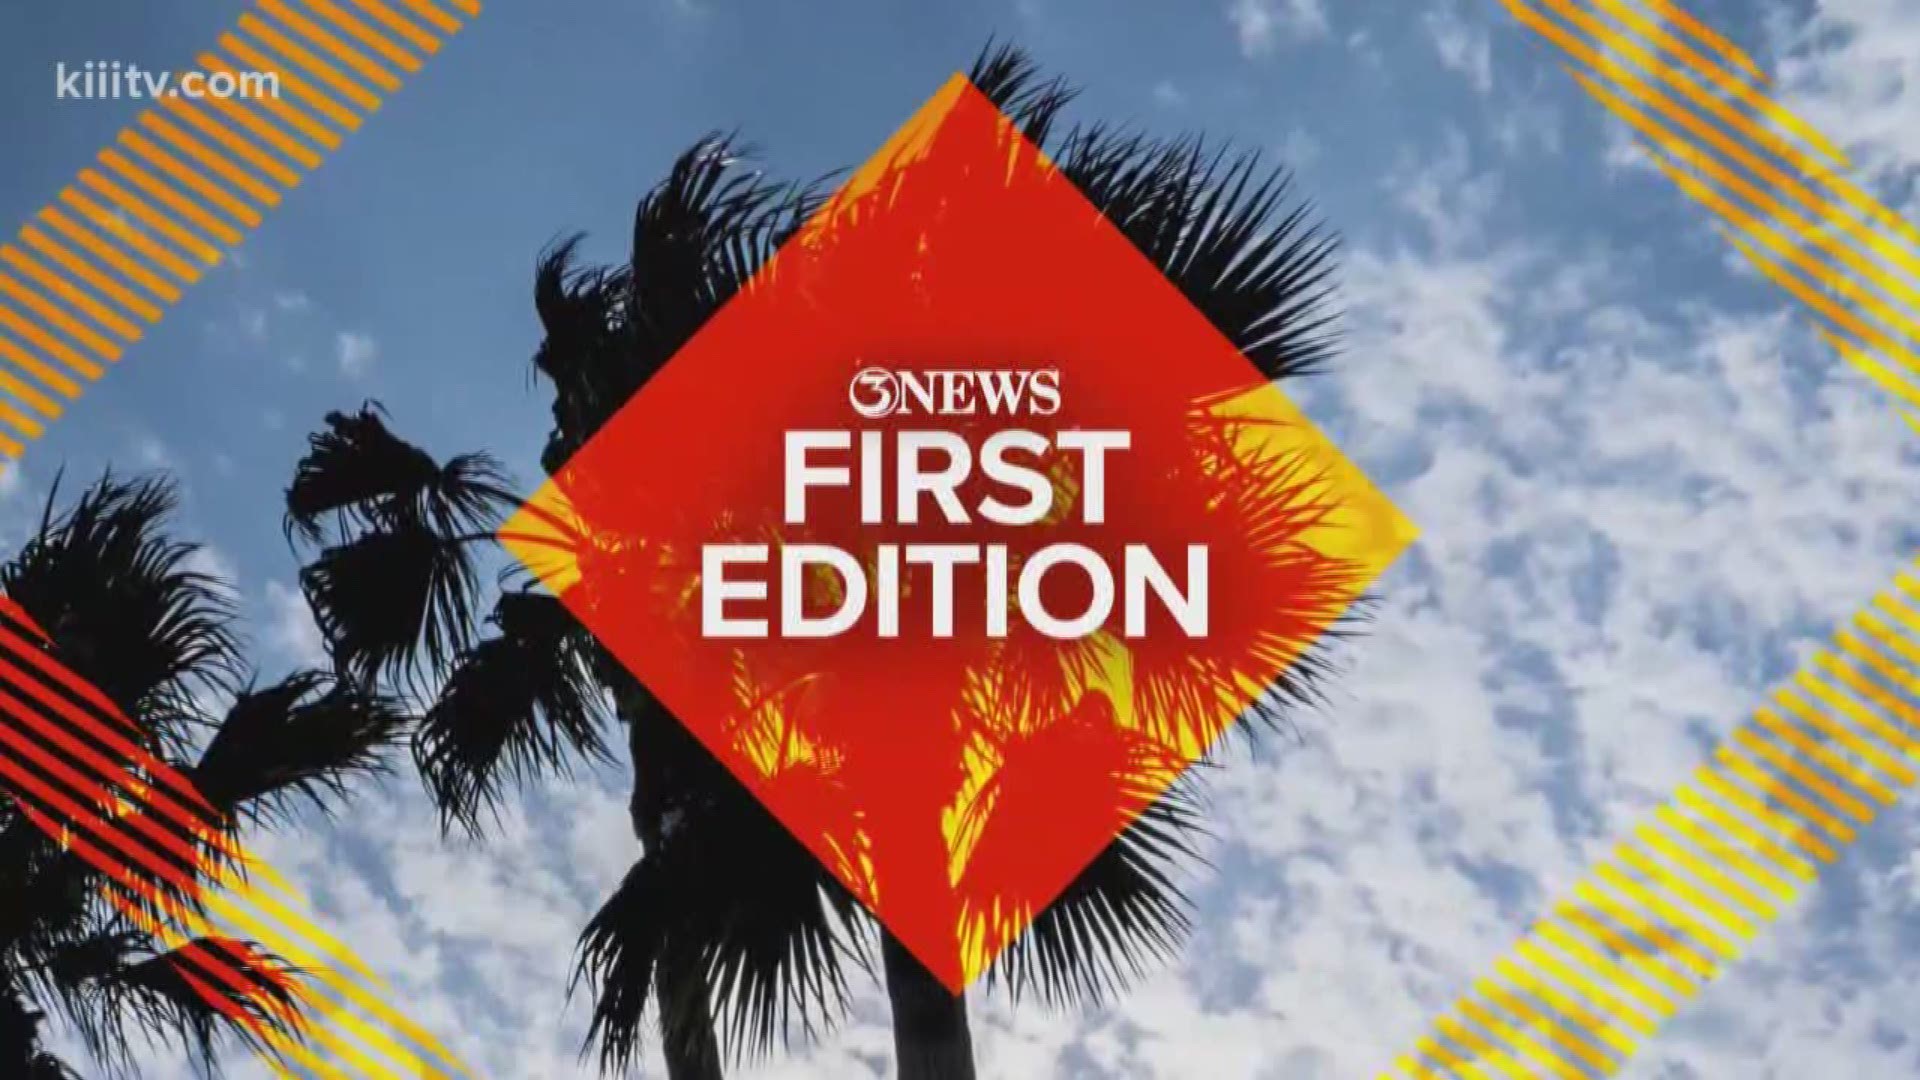 3News First Edition Thursday, May 2, 2019